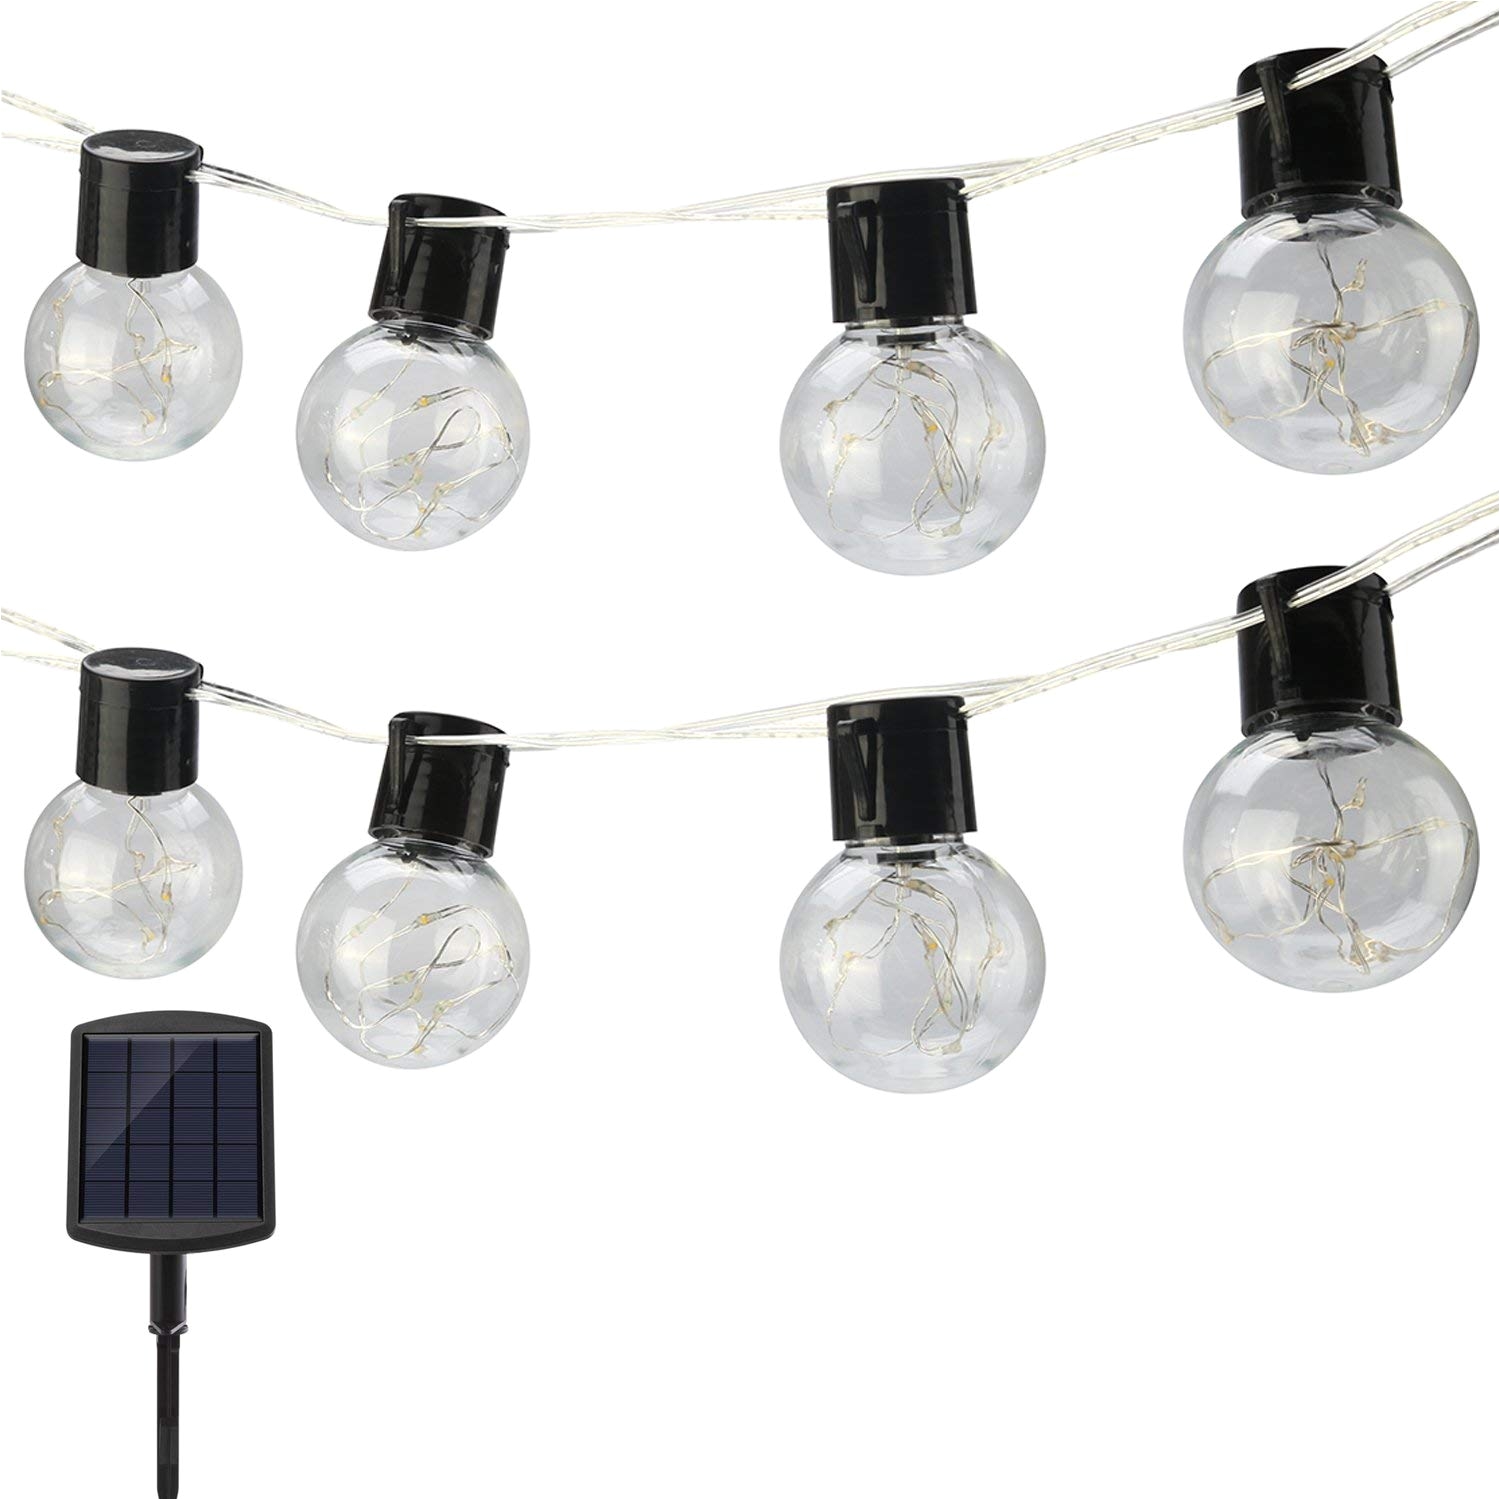 amazon com findyouled solar powered string lights with hanging sockets 20 ft edison bulbs weatherproof solar decoration lights garden outdoor